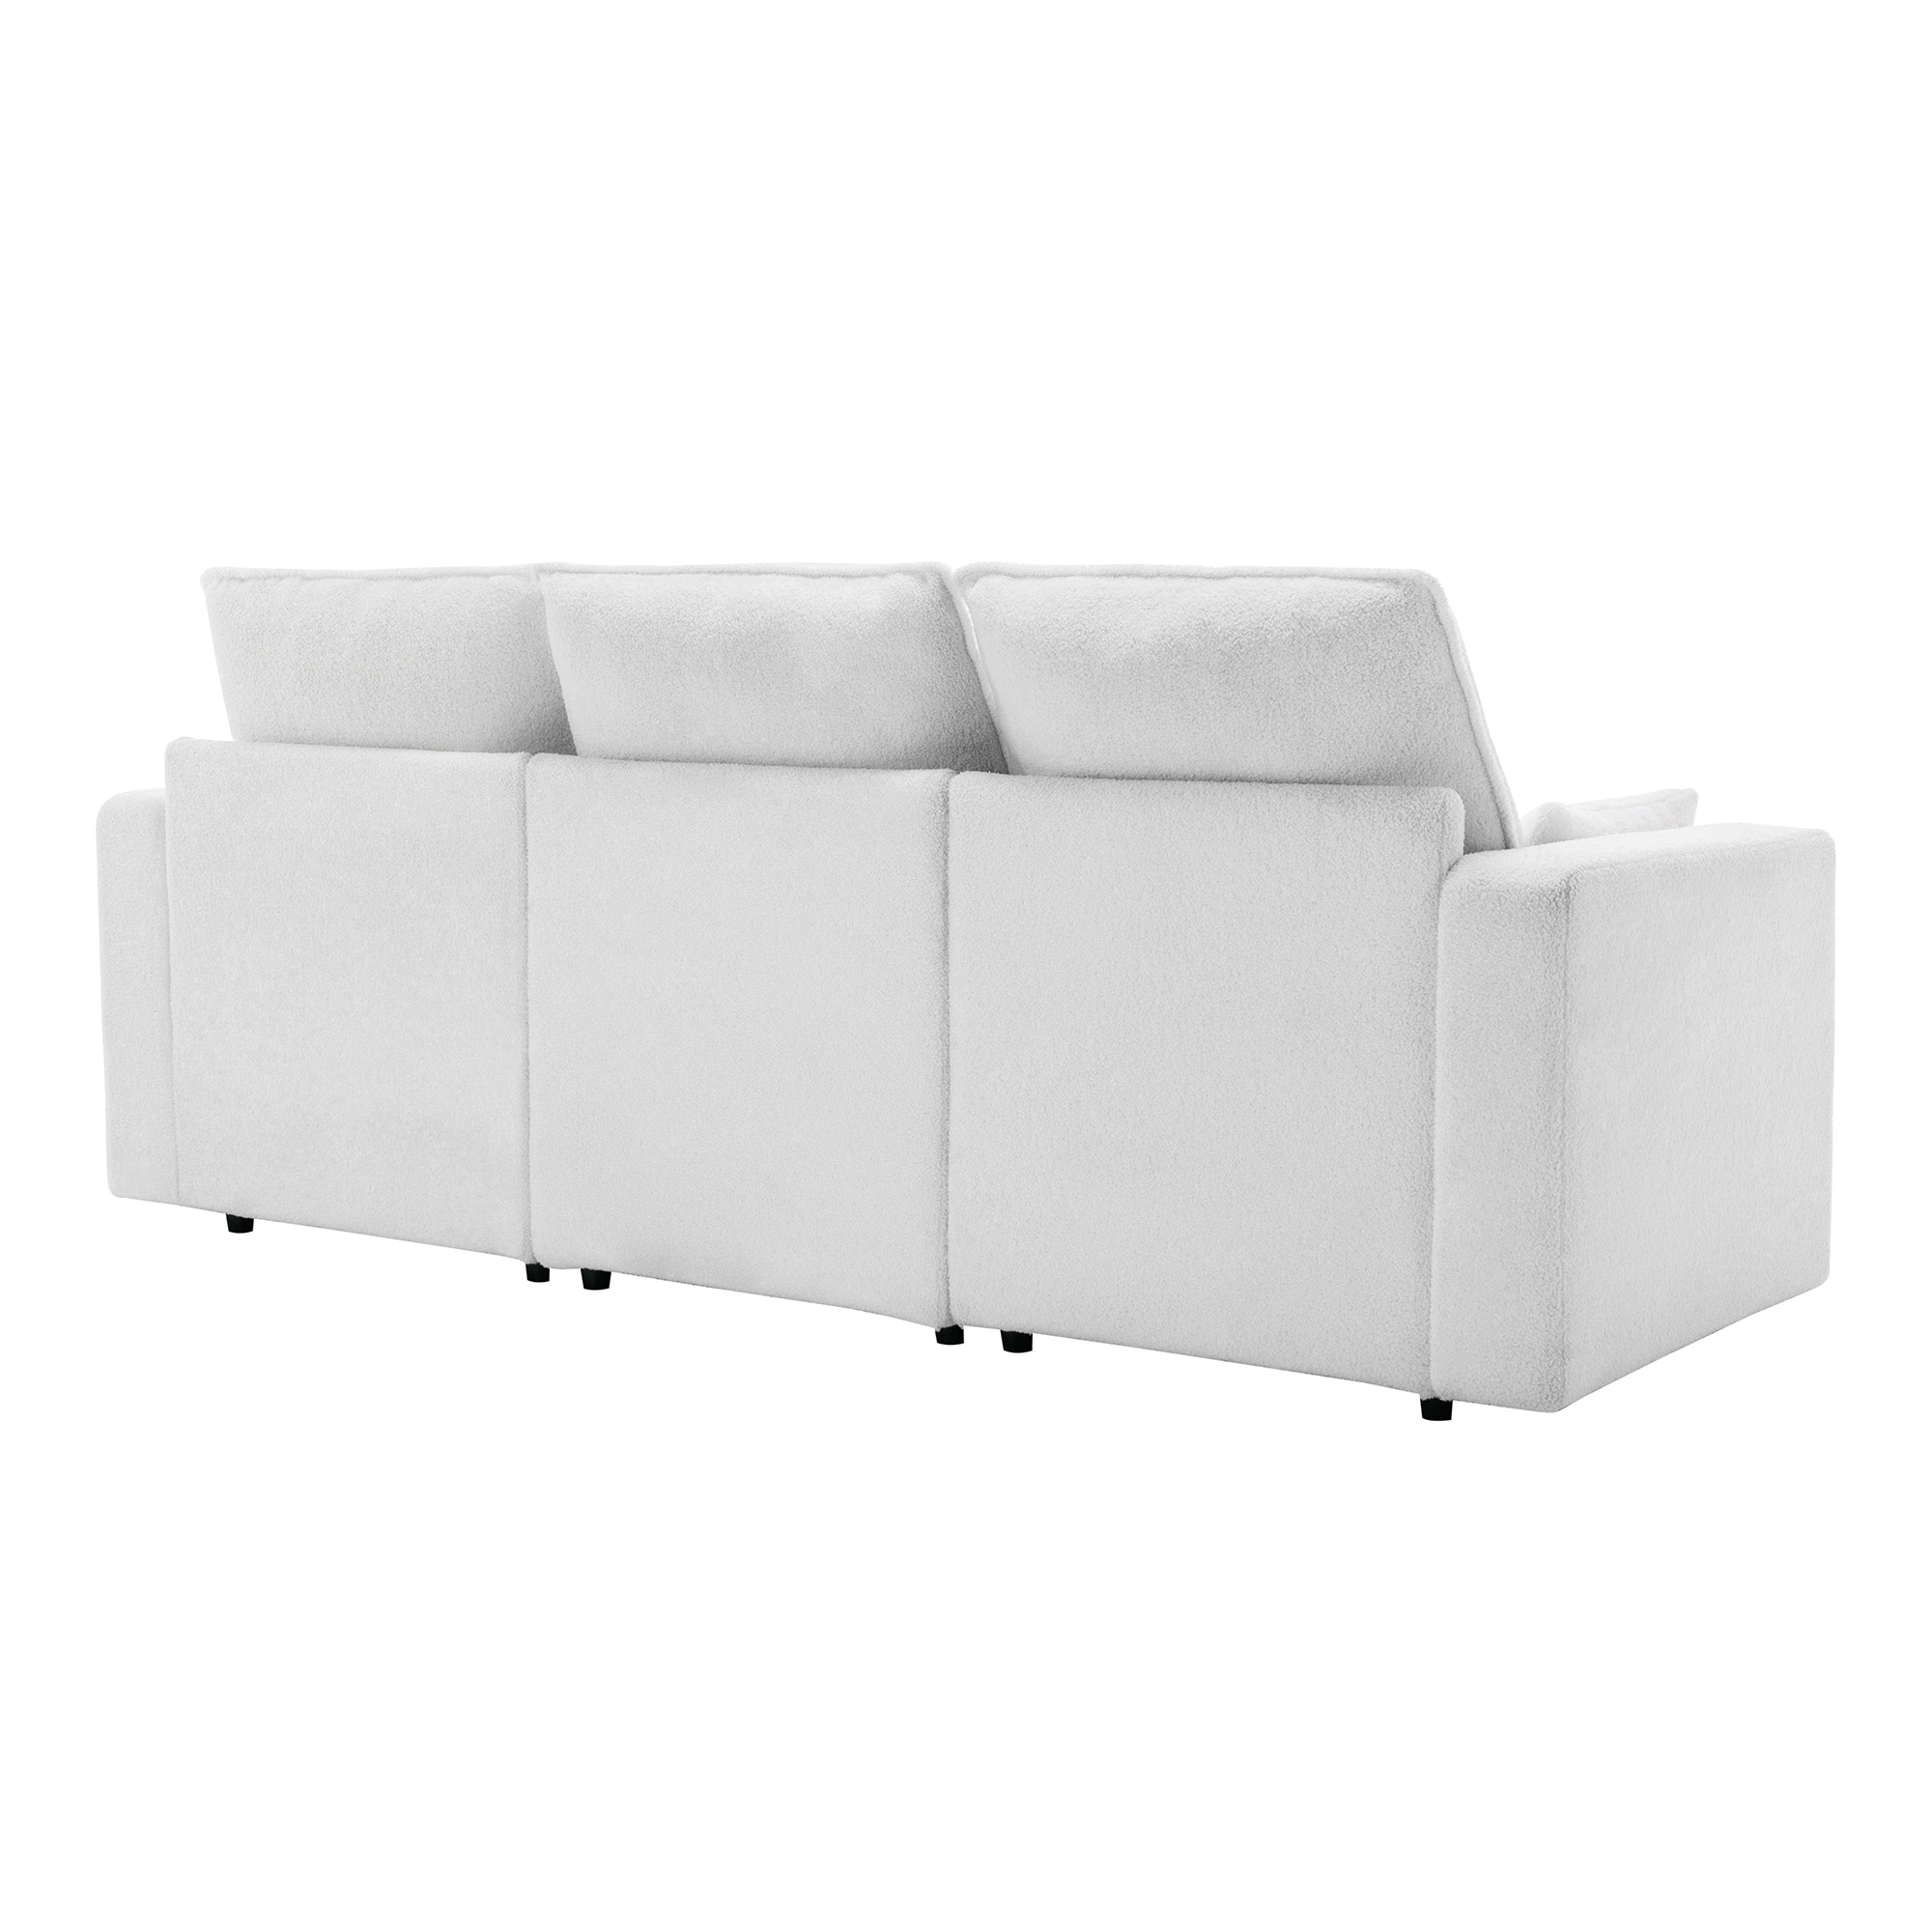 https://ak1.ostkcdn.com/images/products/is/images/direct/29d292277515d3df0233e0504f14a69df9cf5d84/Loveseat-with-Removable-Back-and-Seat-Cushions-Teddy-Fabric-Sofa-Couch-with-2-Pillows-for-Living-Room-Office-Apartment.jpg